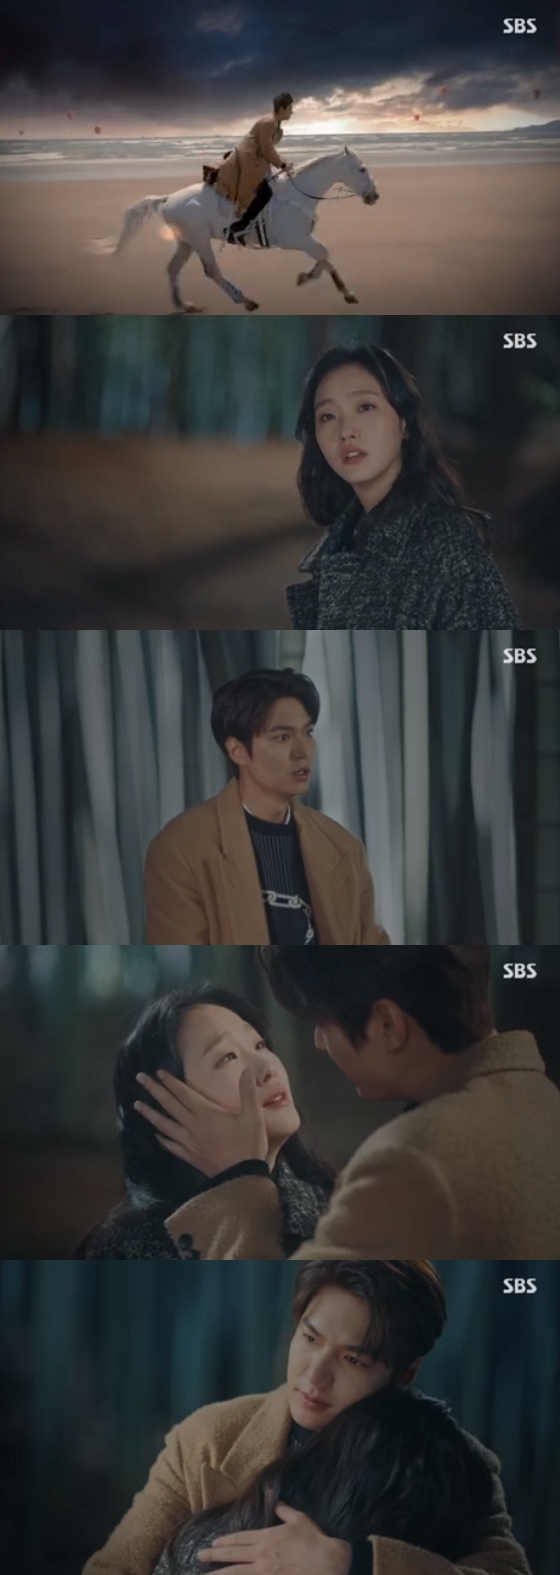 Lee Min-ho delivers a love love for Kim Go-eunOn the 16th SBS gilt drama The King - Eternal Monarch, Lee Min-ho and Kim Go-euns reunited reunion was revealed.On this day, Igon and Jung Tae-eul headed to bamboo forests with extreme longing.Jung Tae-eun, who laughed while looking across the bamboo forest with his eyes, looked at Lee, who appeared on Maximus, and was surprised to find his mouth.Jung Tae-eun, who discovered Igon, ran with tears that flowed down like an explosion and asked, Is it now? Is it really here?Igon hugged Jeong-tae and said, I still miss you so much... I thought I was going to die. I just wanted to hear your voice.Lee and Jung Tae-eul were saddened by the longing of the longing to shed tears and continued to embrace the heartfelt embrace.Cho Young (Udohwan), who was in New Years Day in South Korea, wore a colored hanbok with his family, and his youngest sister told her mother, Its not my brother.It is a family of Cho, he said, suspicious of his brother. Here, even the gun his brother found appeared, which made him nervous in cuteness.Igon visited the police station in Korean Empire.When he learned that Kim Go-eun, who had the same face as Jung Tae-eul, was a deadline, he found that the same faces are stealing the lives of those who have the same face.Lee, who discovered that the time stopped again, headed to the forest saying, Finally, Irim came to Korean Empire.When Igon heard that no one came to the Great Forest, he sent an army to Haeundae saying, If you could meet the Great Forest by setting up a boundary, I already met it. Its different.So, Igon and Irim (Lee Jung-jin) had an intense first meeting at Haeundae. Igon said, Reversal Irim. Do you remember my voice?I am Memory. Irim still threatened the citizens with a relaxed smile and threatened the citizens.The embarrassed Igon said, Stop shooting. Citizens safety is the first priority. In the meantime, a bullet aimed at Igon was fired from the unit of Irim.In response, Cho Eun-seop (Udo-hwan) jumped in and blocked the bullet with his body, and Irim was shocked to leave the scene by cutting the knife on the neck of the citizens.Lee said, I transfer from the injured person. I can not increase the number of casualties.After the words of Igon, who ordered Stay the video somehow, this gunfight spreads out with witnesses along with the ambassador of Reversal Irim, and the Korean Empire people are Why gunfight, Is this still alive?I was not dead. Ion also told Noh Sang-gung (Kim Young-ok) It was the same as that day 25 years ago. I do not understand any of you now.Thats what he was looking for, he was resurrected as he was not old. Kang Shin-jae (Kim Kyung-nam) headed to Lee Ji-hoons cemetery with Jung Tae-eul, saying, Do you know why I became a detective? I wanted a gun in my hand when someone asked me who you were.I shot me or shot my opponent, he confessed, Why did not you find me in the world, I was here. Jung Tae-eul was tearful with Kang Shin-jae.Irim visited Buyeong-gun. When Irim wanted the emperors ring, Buyeong-gun said, It should not be coveted by us. But Irim said, I am the eldest son.Its mine, Irim replied, flashing his eyes with the blood of the Sioux of Buyeong. Im not my brother and we.I hope my nephew is a little hard, and I hope you lose something to do that. My brother. Irim disappeared with the emperors ring on the finger of the Buyeong army.Irim, who met Boy reading a book with a bloody face, continued to talk with Boy, who was not embarrassed to see himself.Irim, who challenged Boy, who is reading the story of King Arthur, said, Justice is not making swords, but it is justice that swords make.Boy said, What is changing in your world? Keep it safe.Cho Young-eun asked Jung Tae-eun, What will you do when it is over? Can you abandon it and become an empress?Lee, who was buried in Buyeong-gun, visited Jeongtae and delivered flowers. Its a little late this time. Lee said, I never delivered a flower.Oh, I never told you this. I love you, you. I love Savoie a lot. 